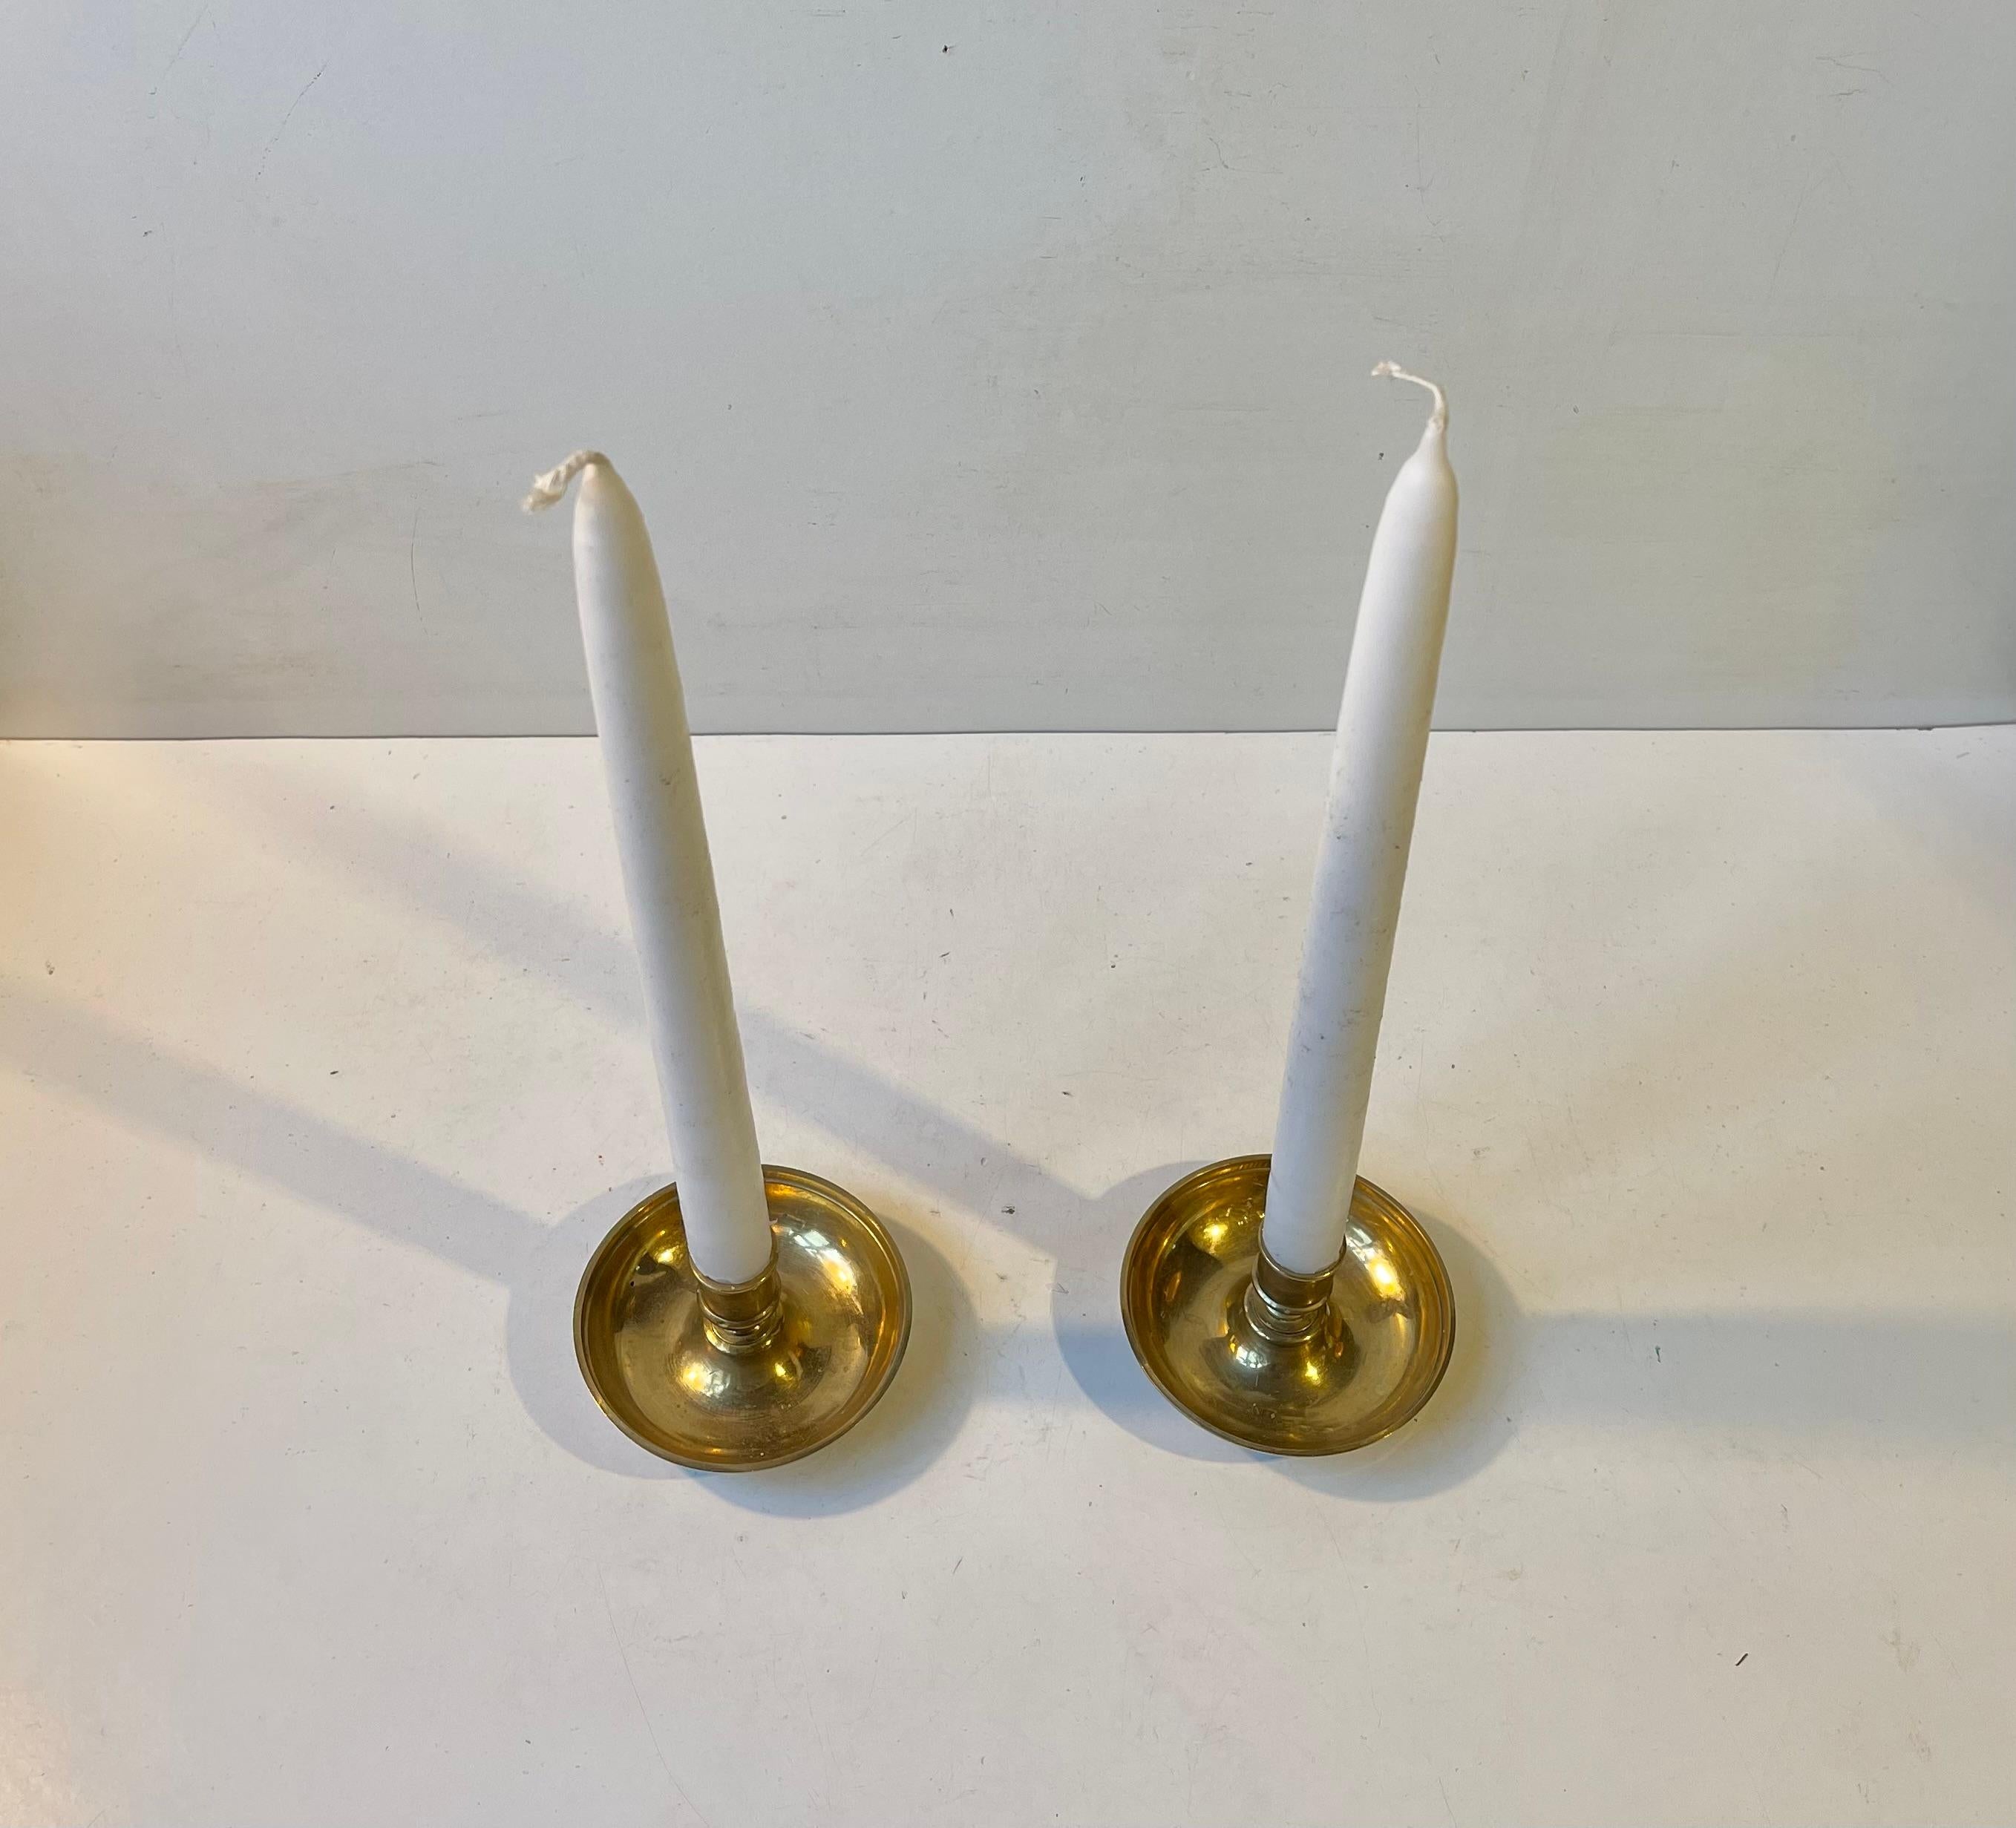 A bun shaped brass container that transforms into two candlesticks. Its commonly known under the name 'Officer's Campaign - Travel Candlesticks'. These were used by both the English and US military from the civil war and up to circa 1900. This